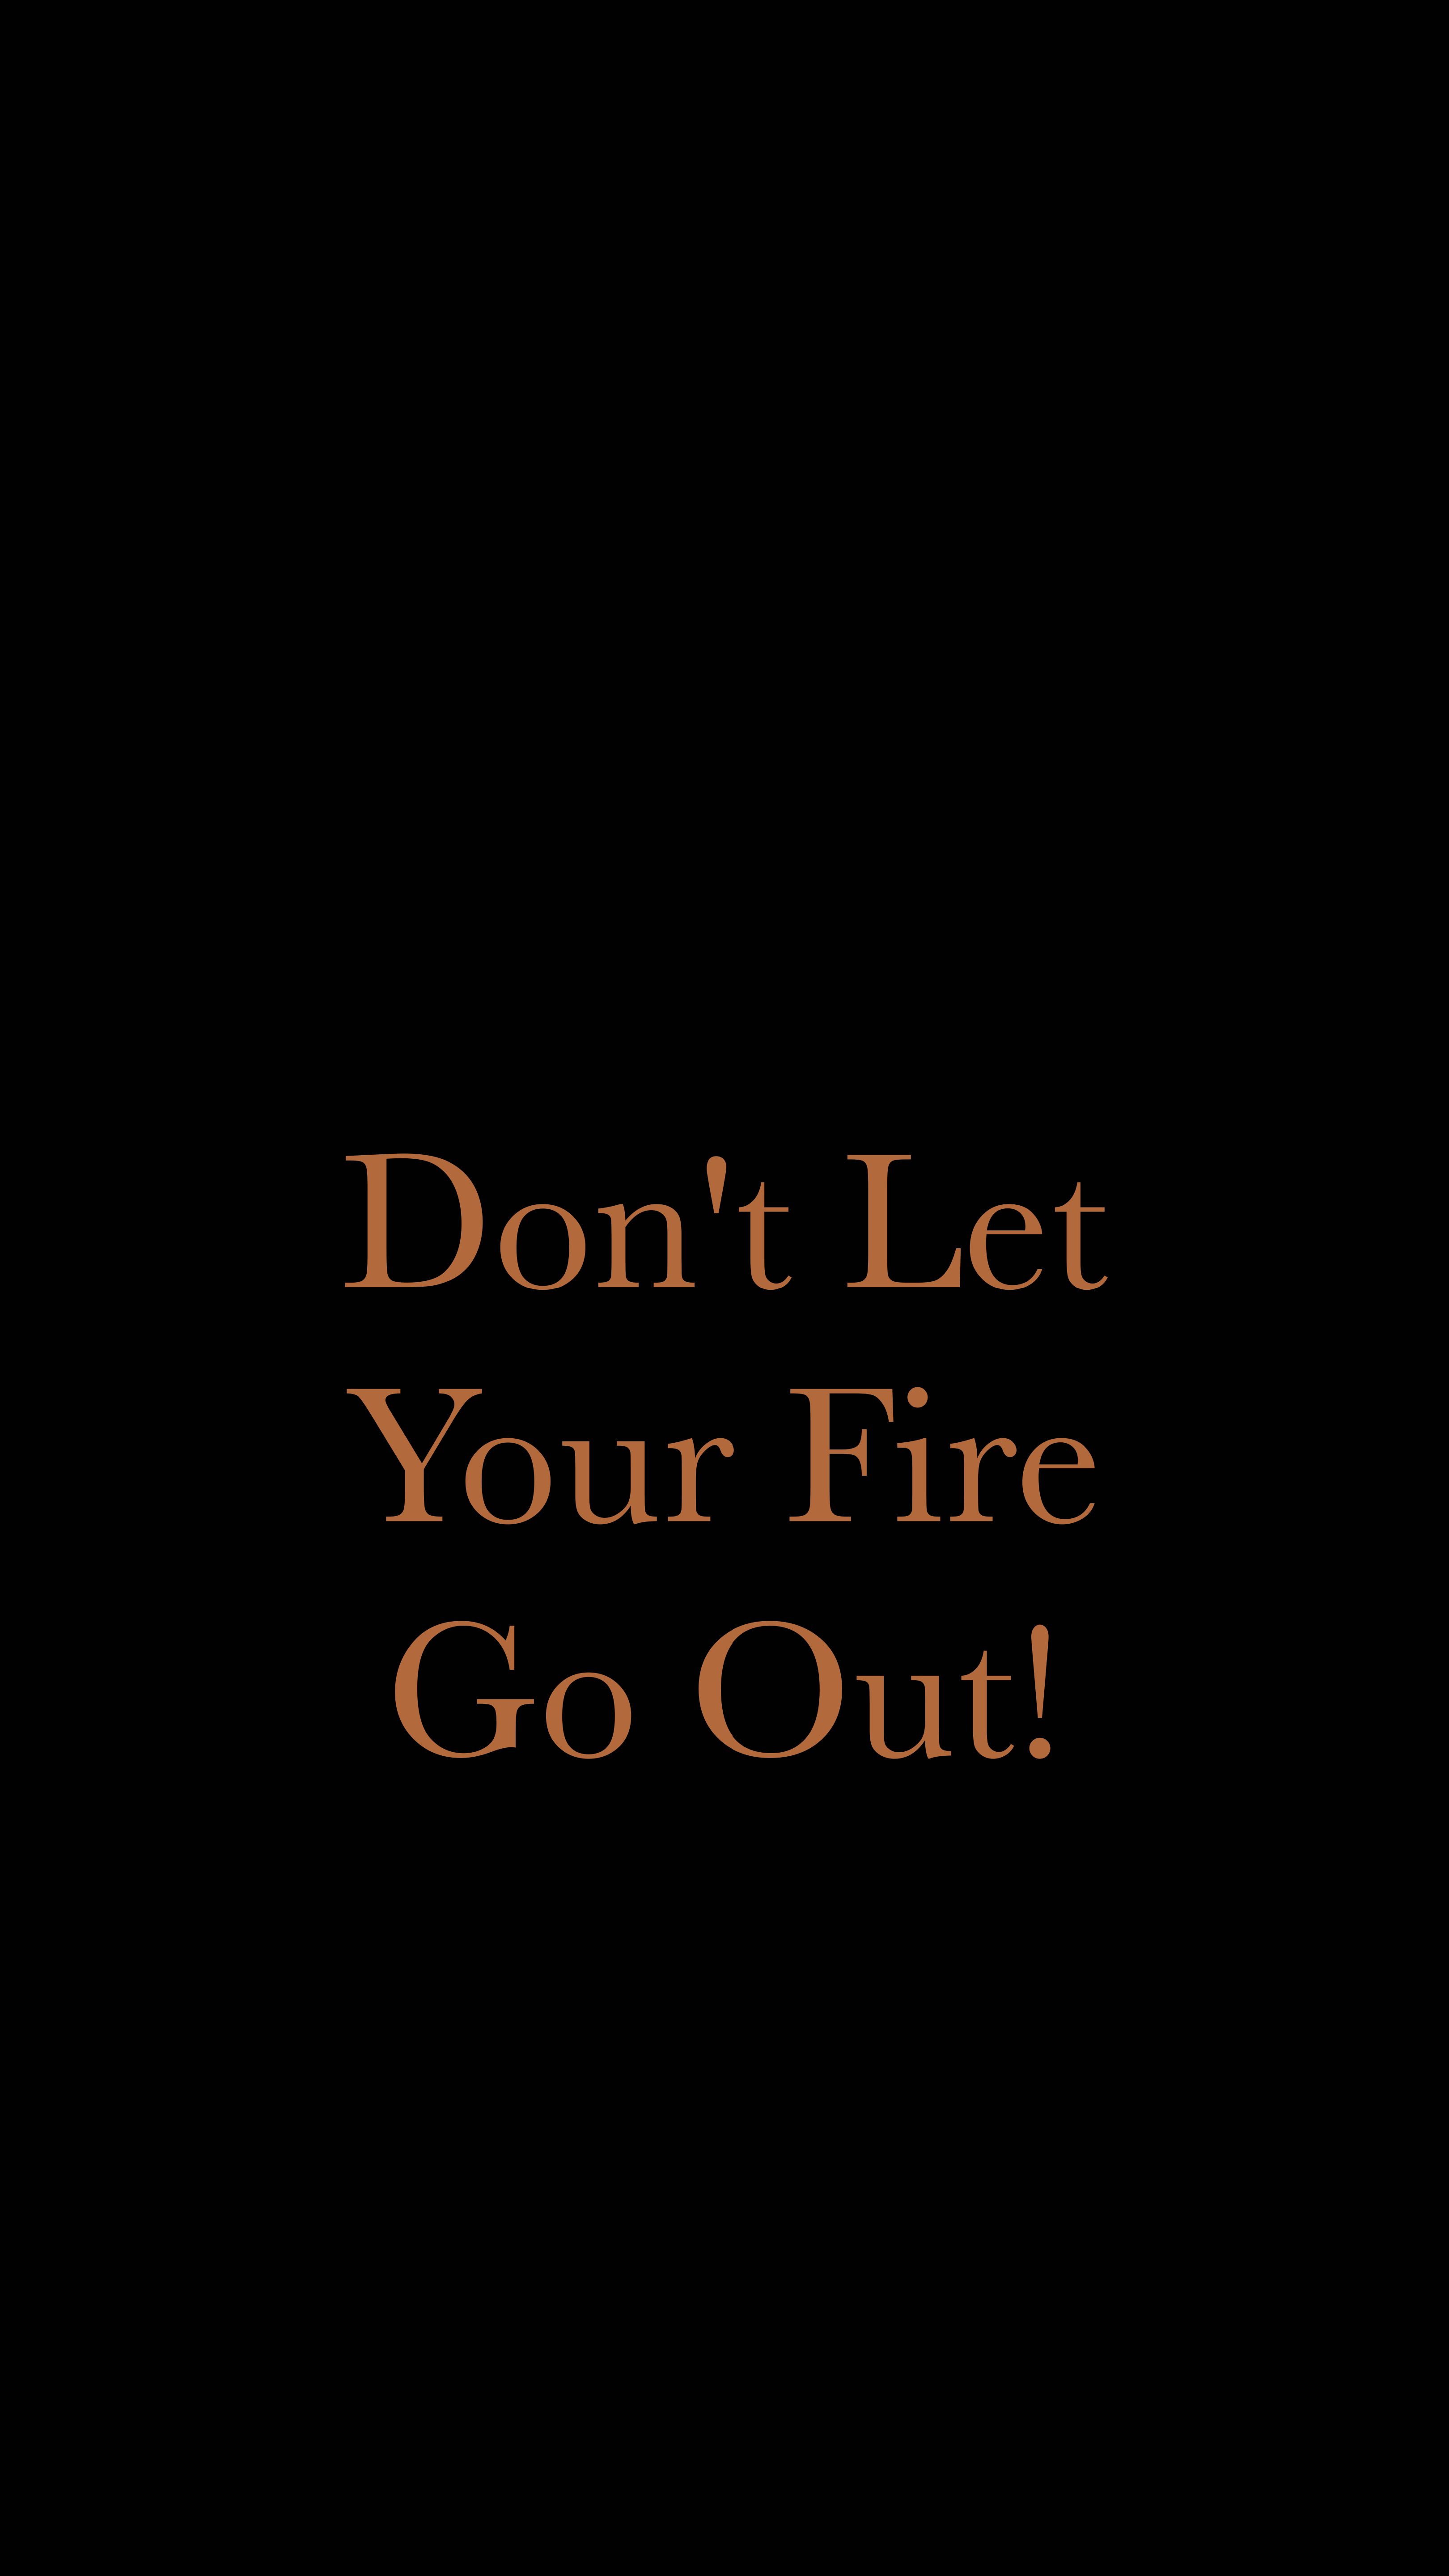 Wallpaper for mobile devices words, inspiration, fire, inscription